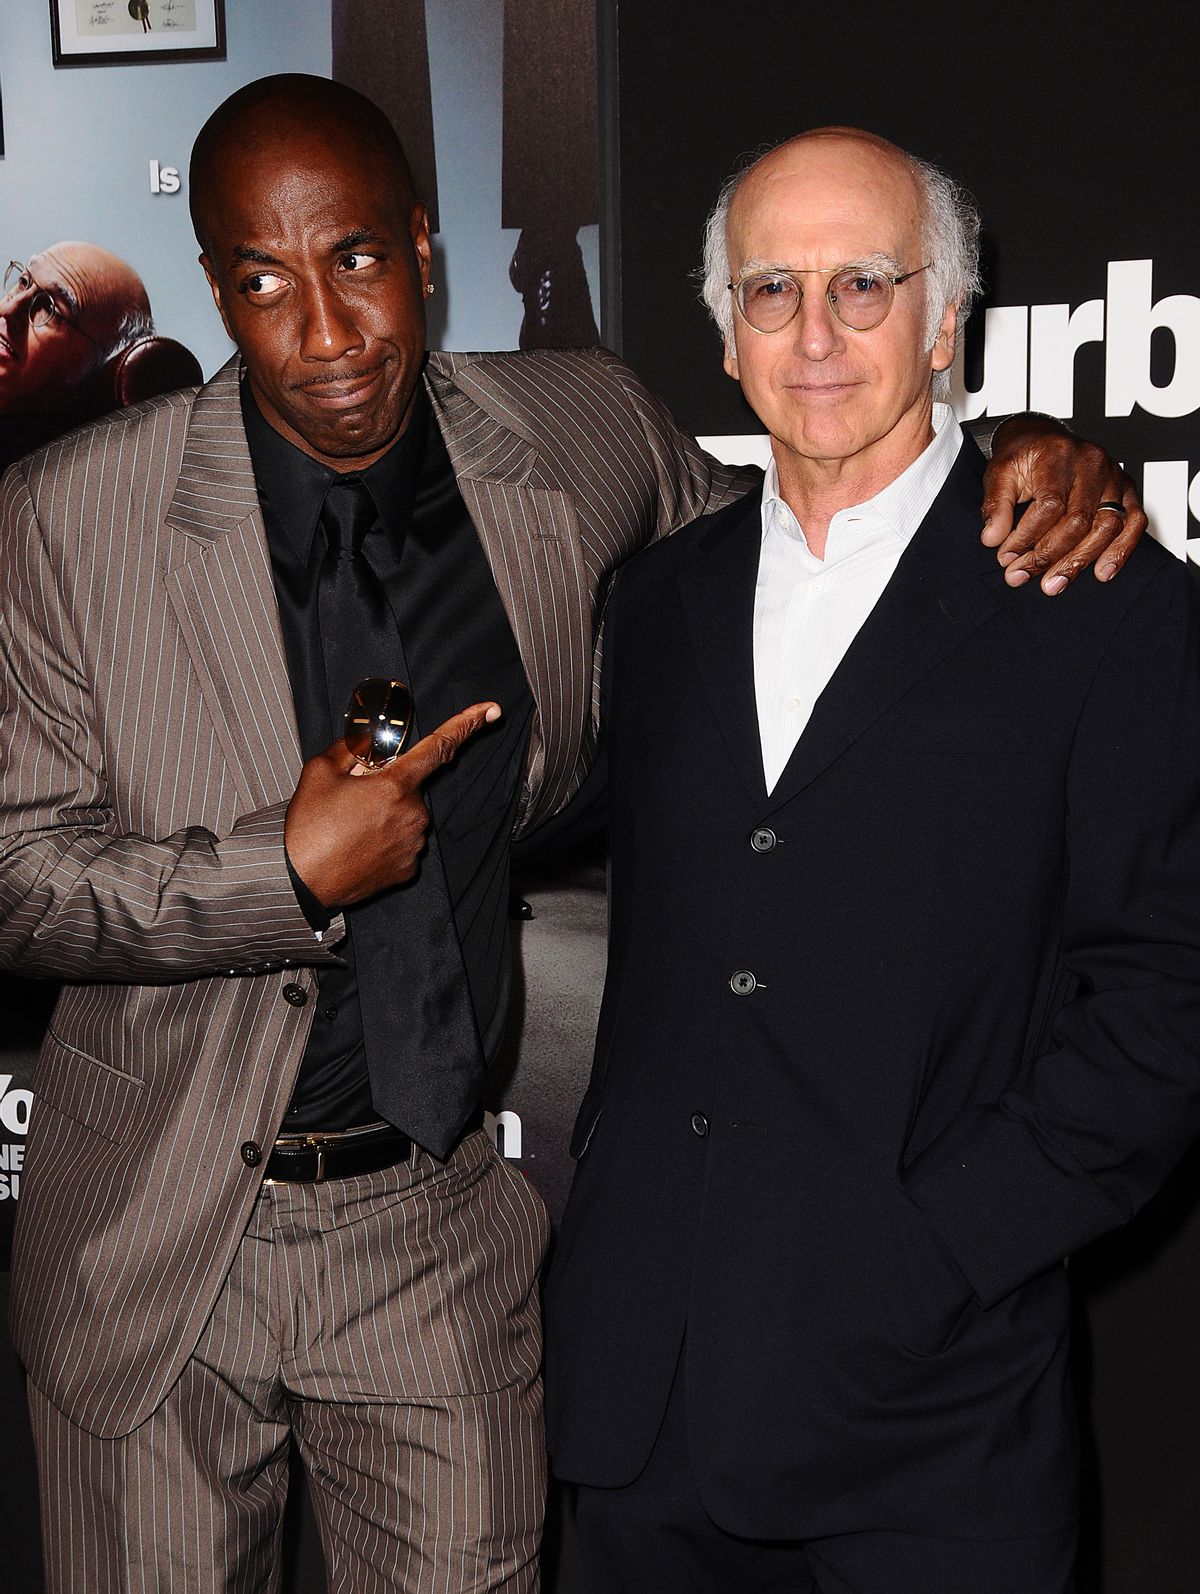 HOLLYWOOD - SEPTEMBER 15: J.B. Smoove and Larry David attend the 7th season premiere of HBO's "Curb Your Enthusiasm" at Paramount Theater on the Paramount Studios lot on September 15, 2009 in Hollywood, California.  (Photo by Jason LaVeris/FilmMagic) (Jason LaVeris / Contributor)